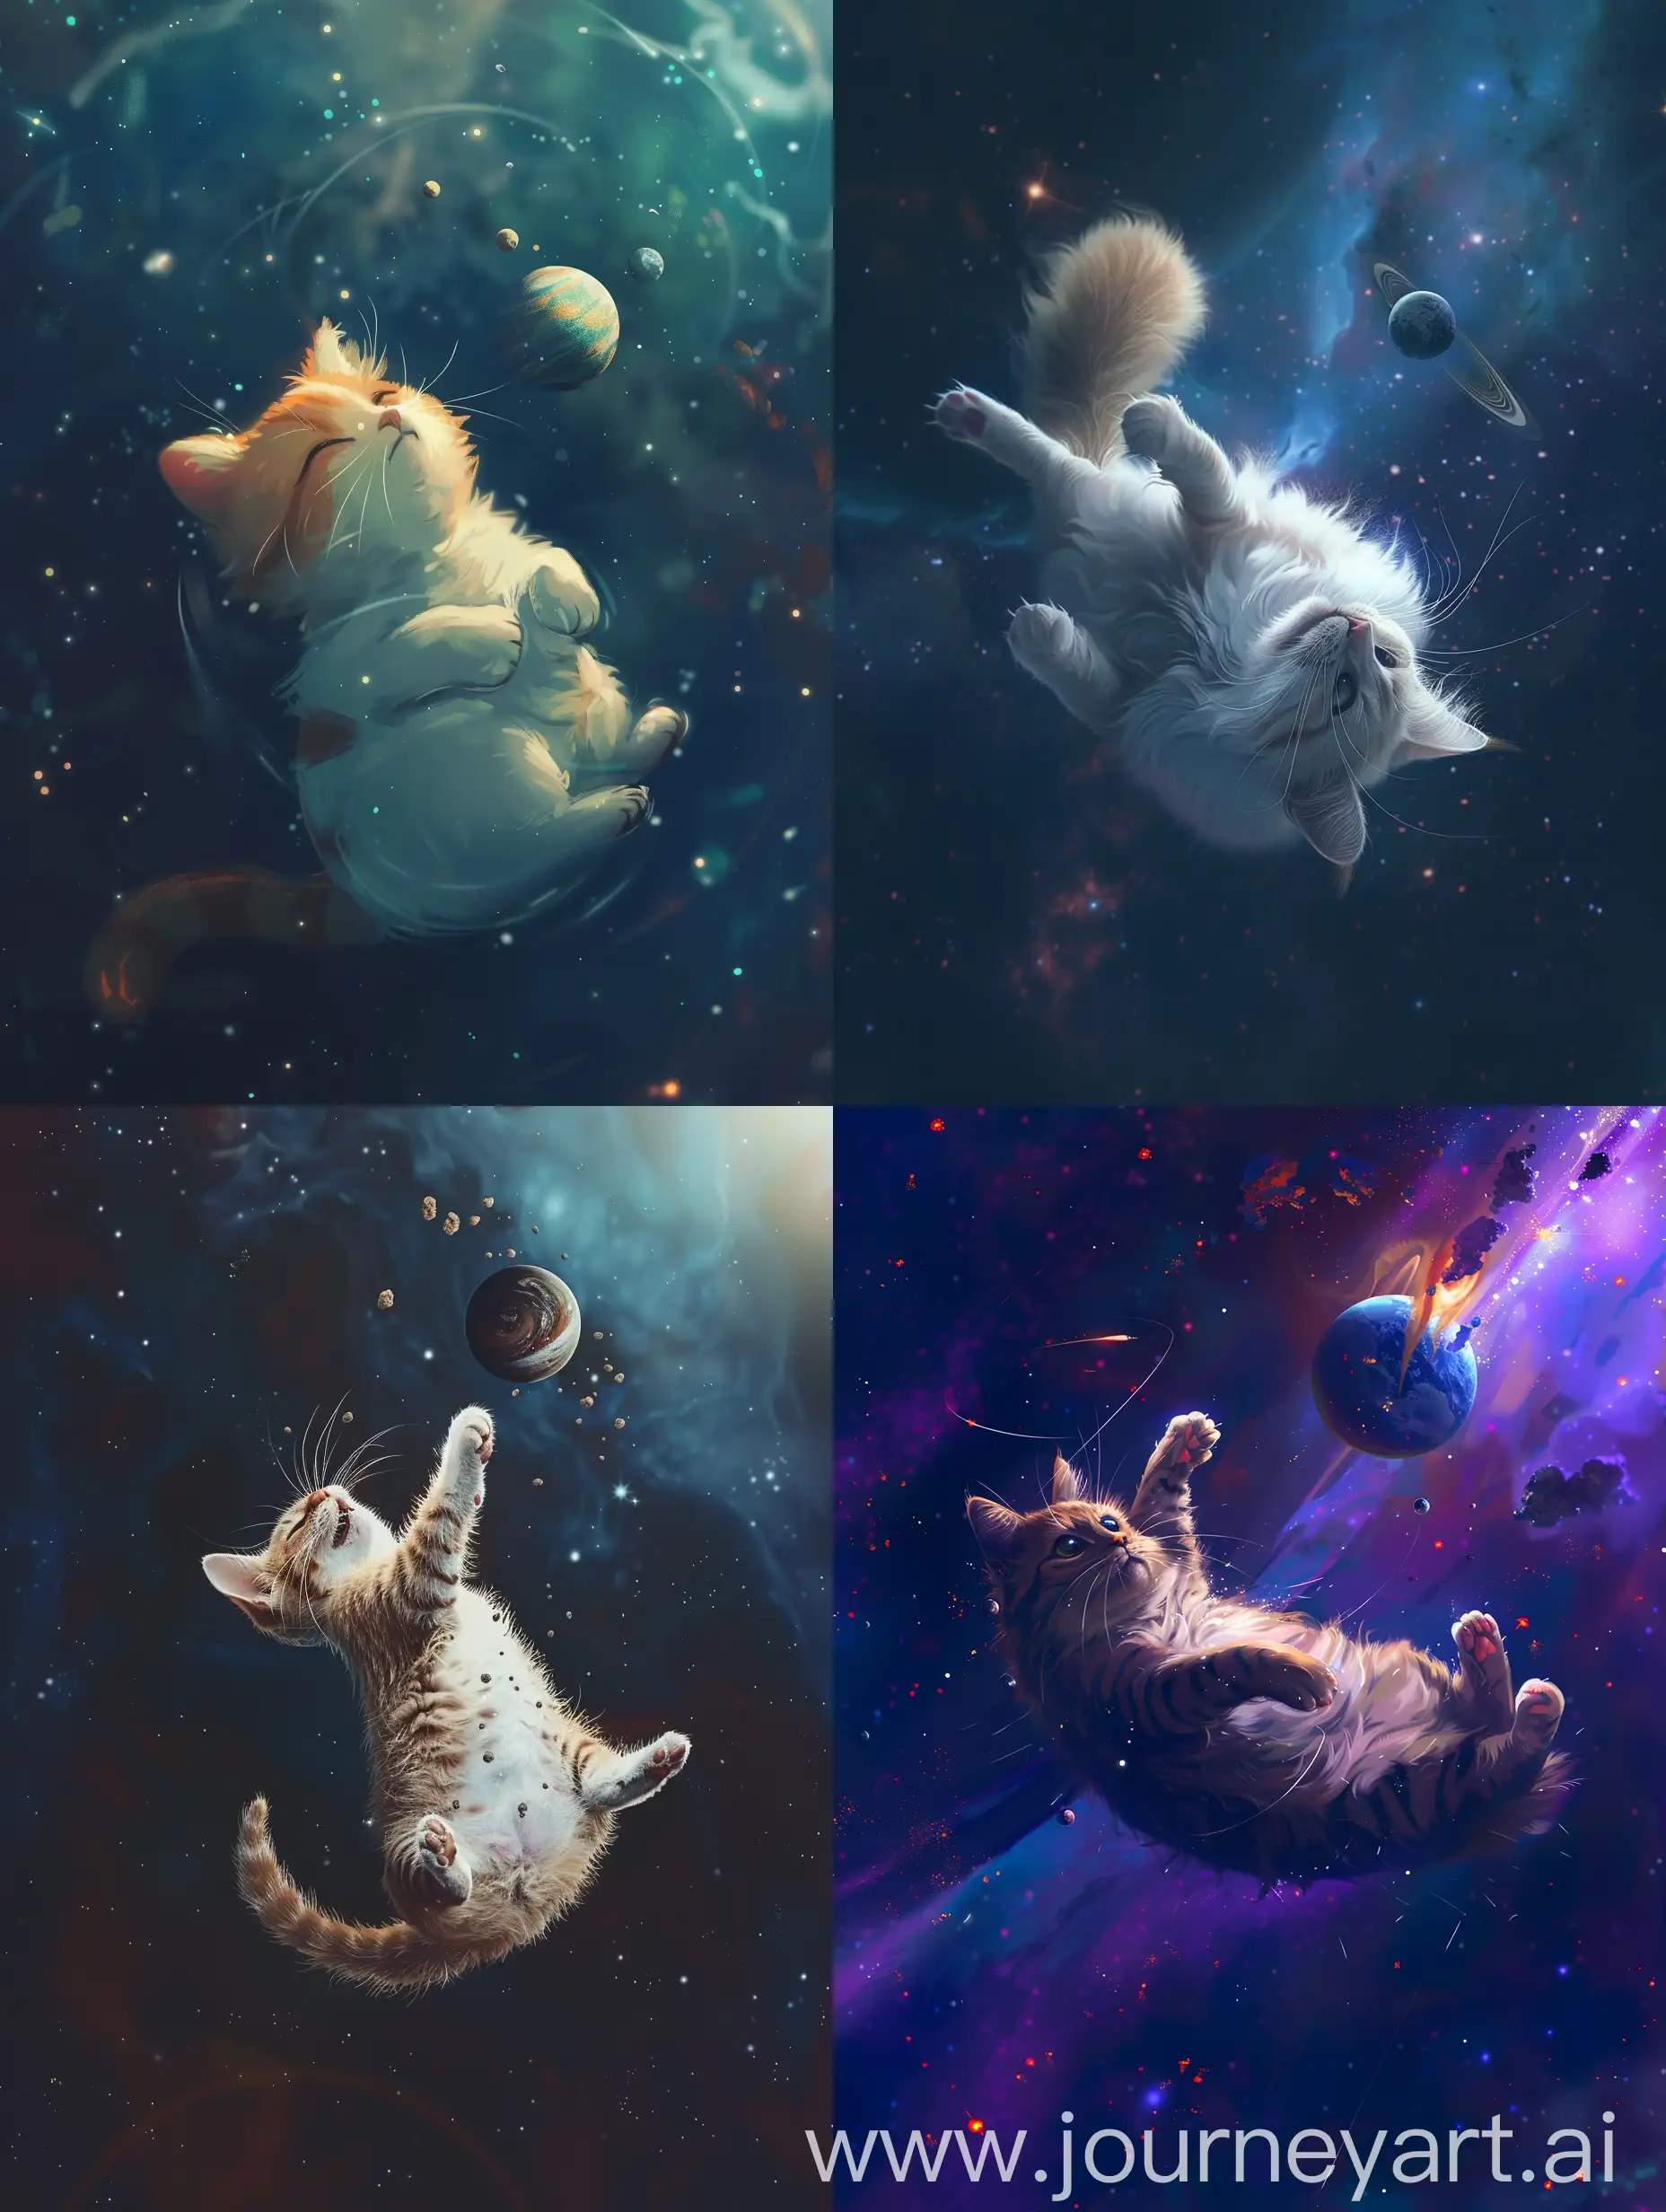 Playful-Cat-Floating-in-Space-with-Planet-Toy-Anime-Style